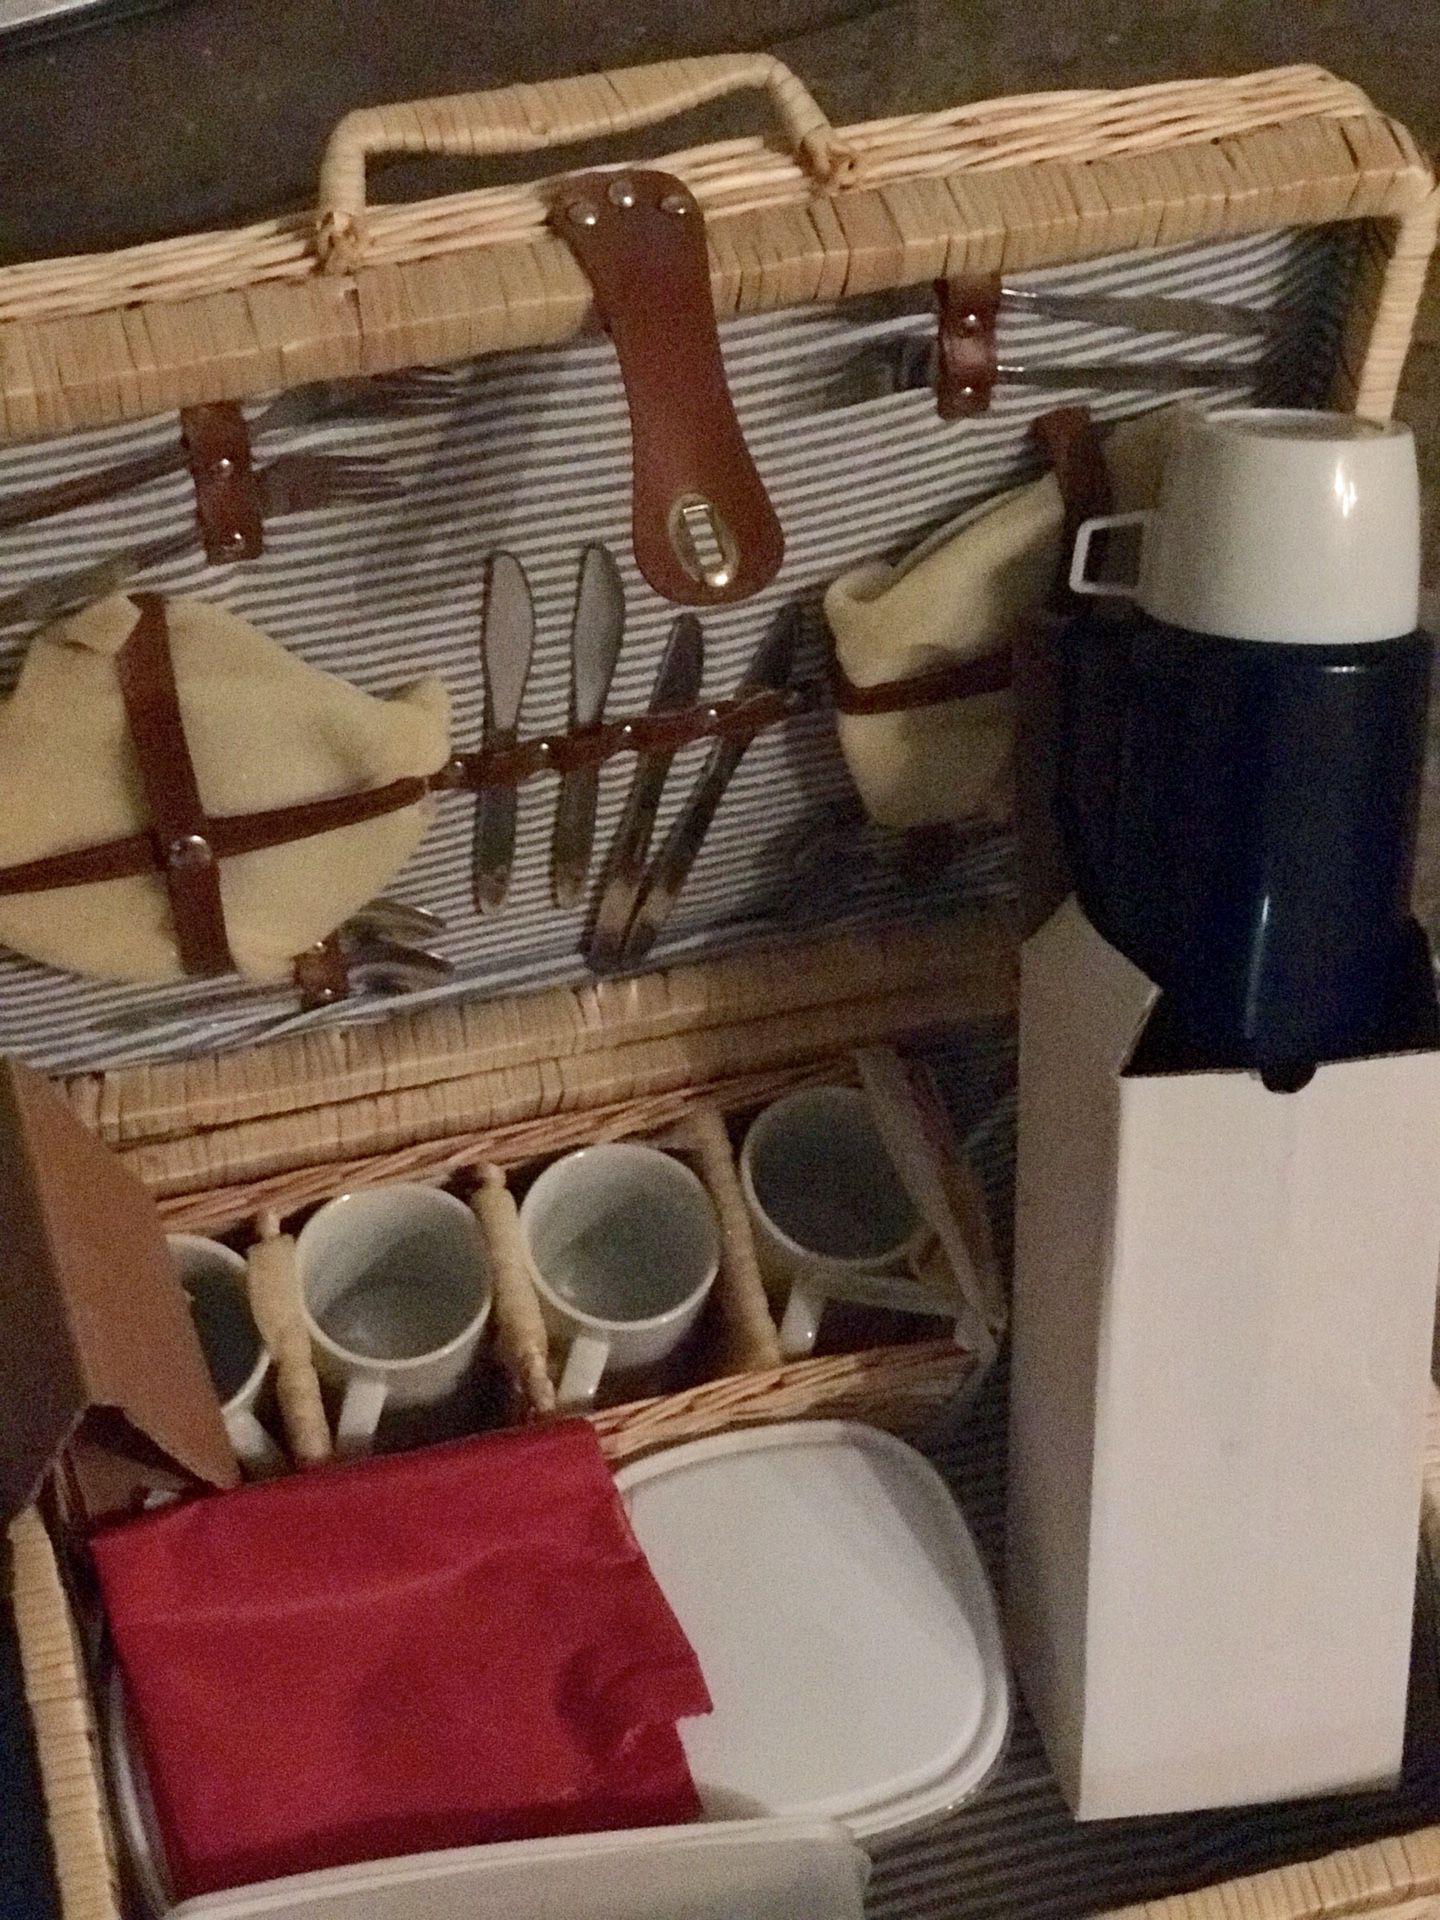 Picnic Basket with Porcelain Plates, Cups, Silverware